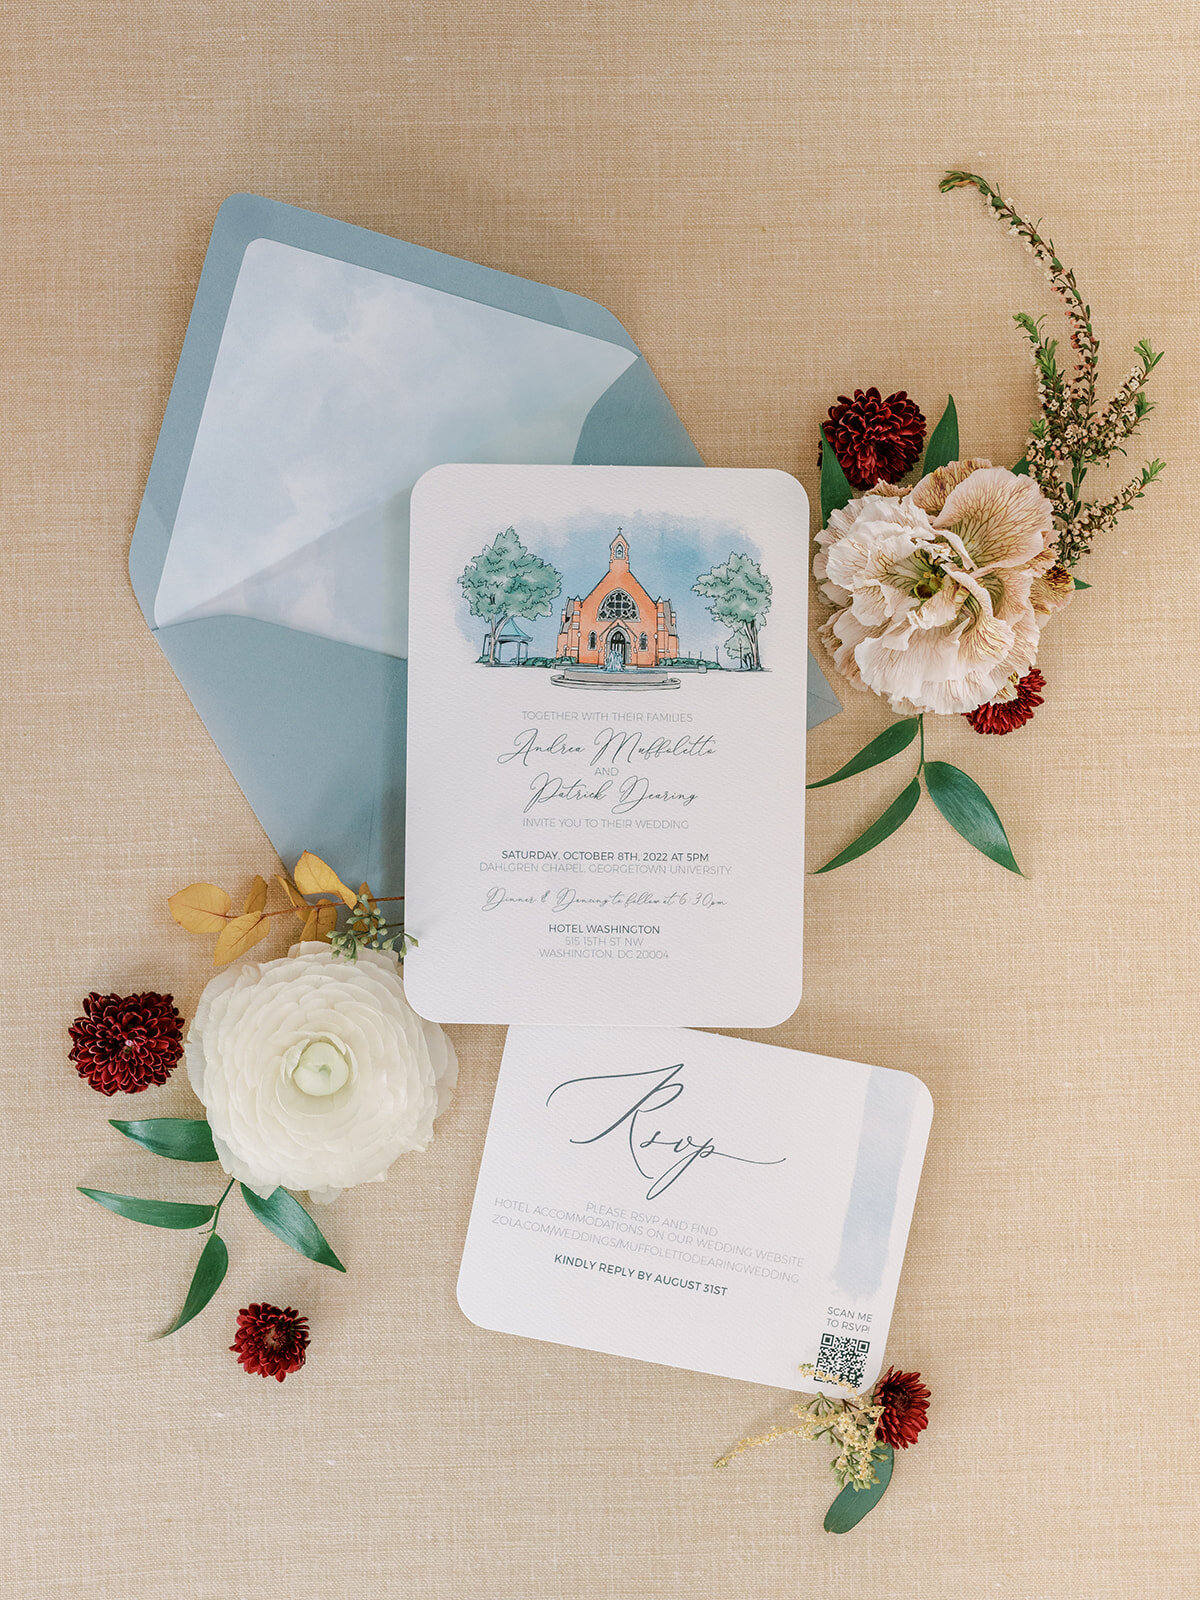 Blue and tan fall wedding flowers surround invitation suite for wedding in Georgetown DC